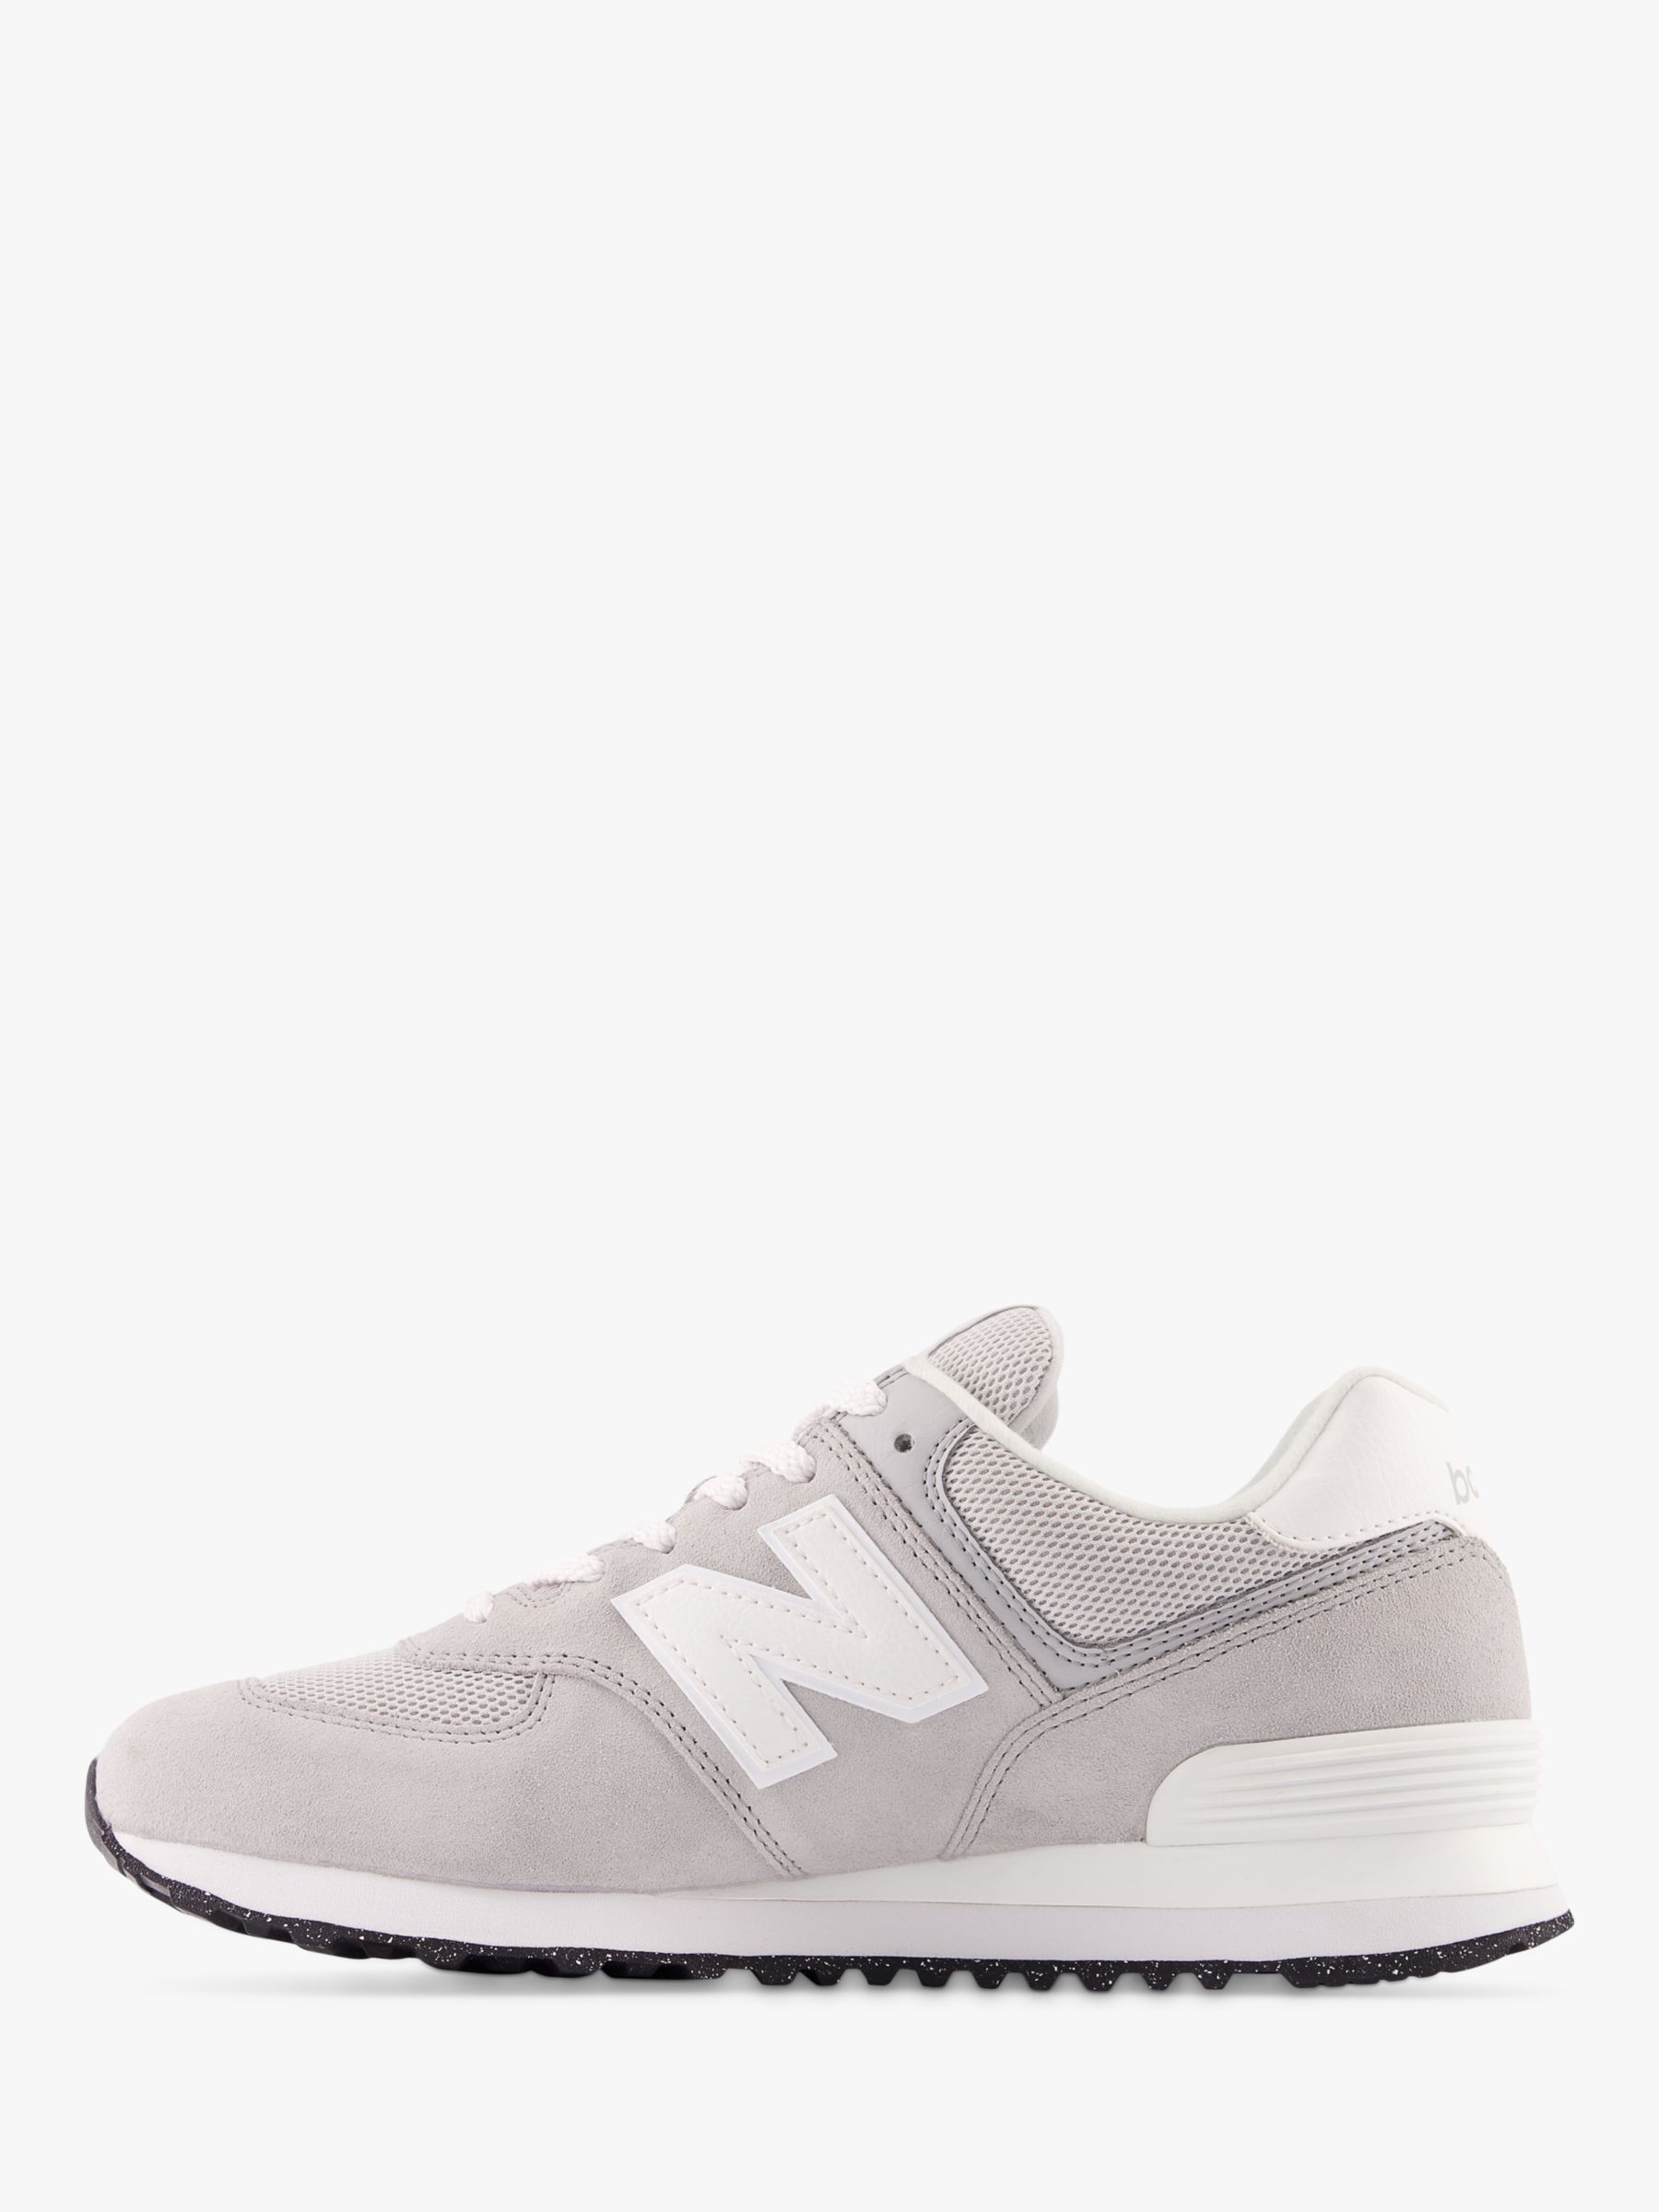 Buy New Balance 574 Suede Mesh Trainers, Grey Online at johnlewis.com